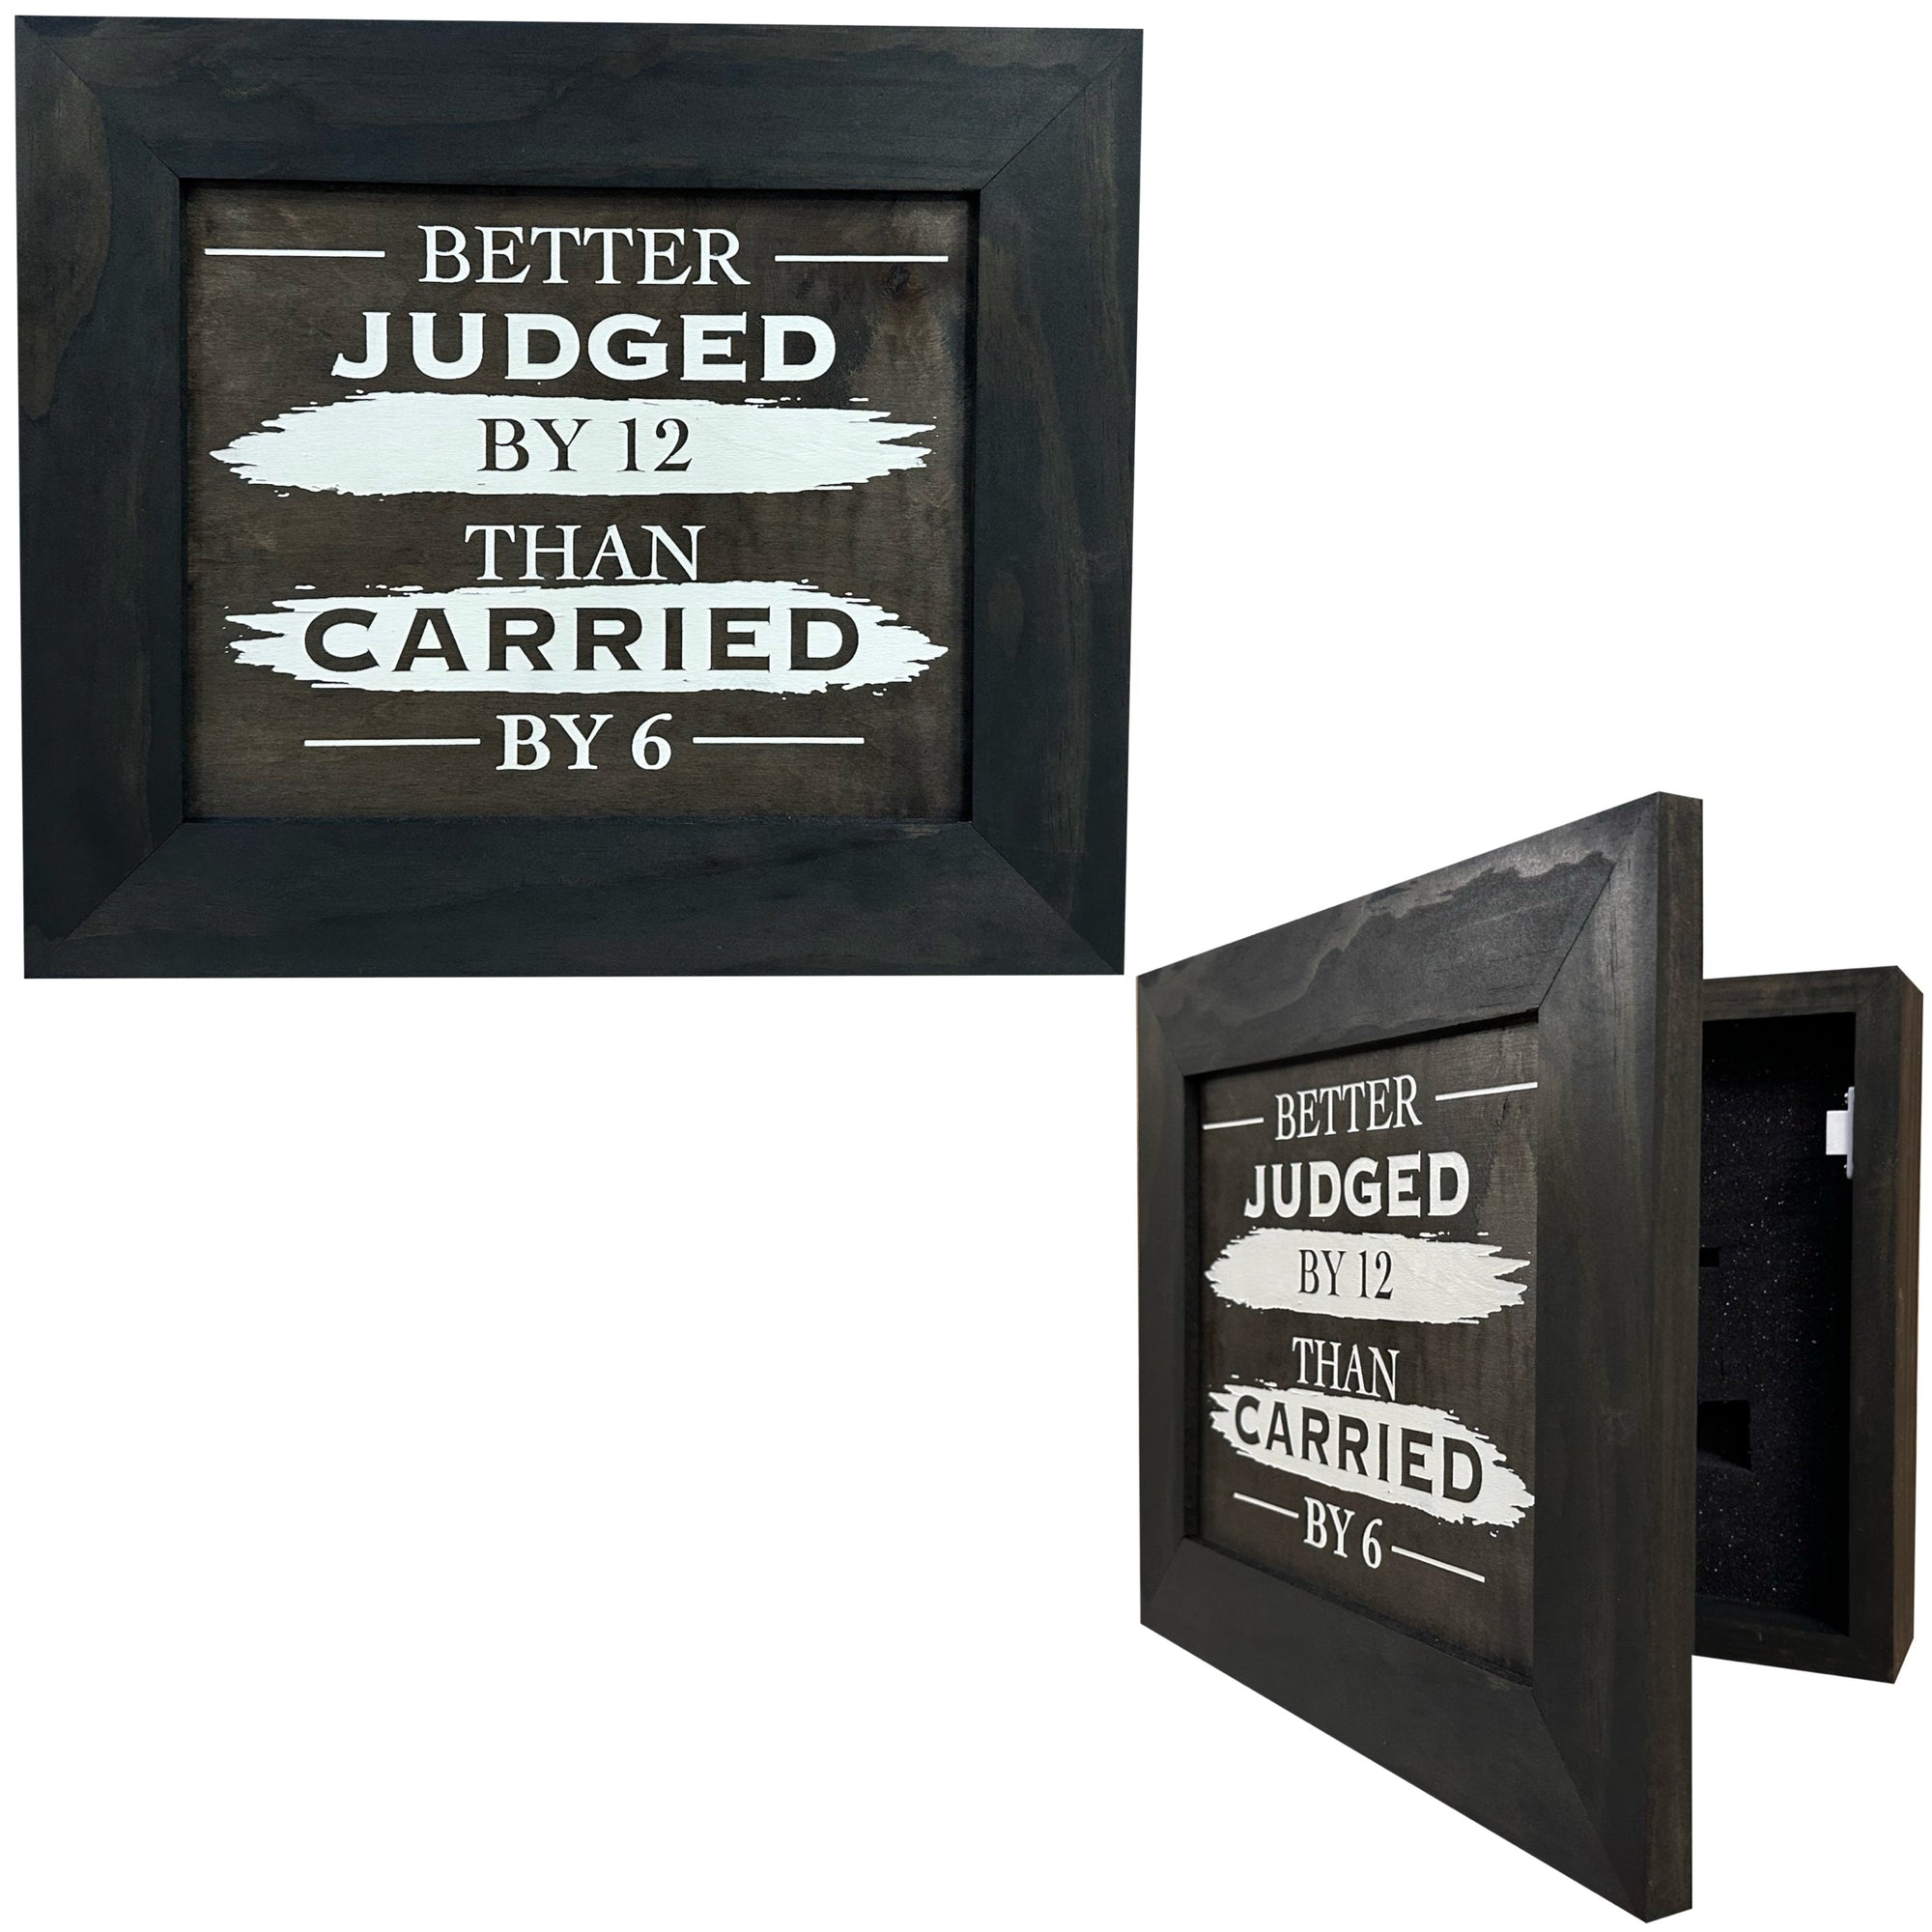 Judged by 12 Hidden Gun Cabinet - Recessed In Wall or Mount On The Wall